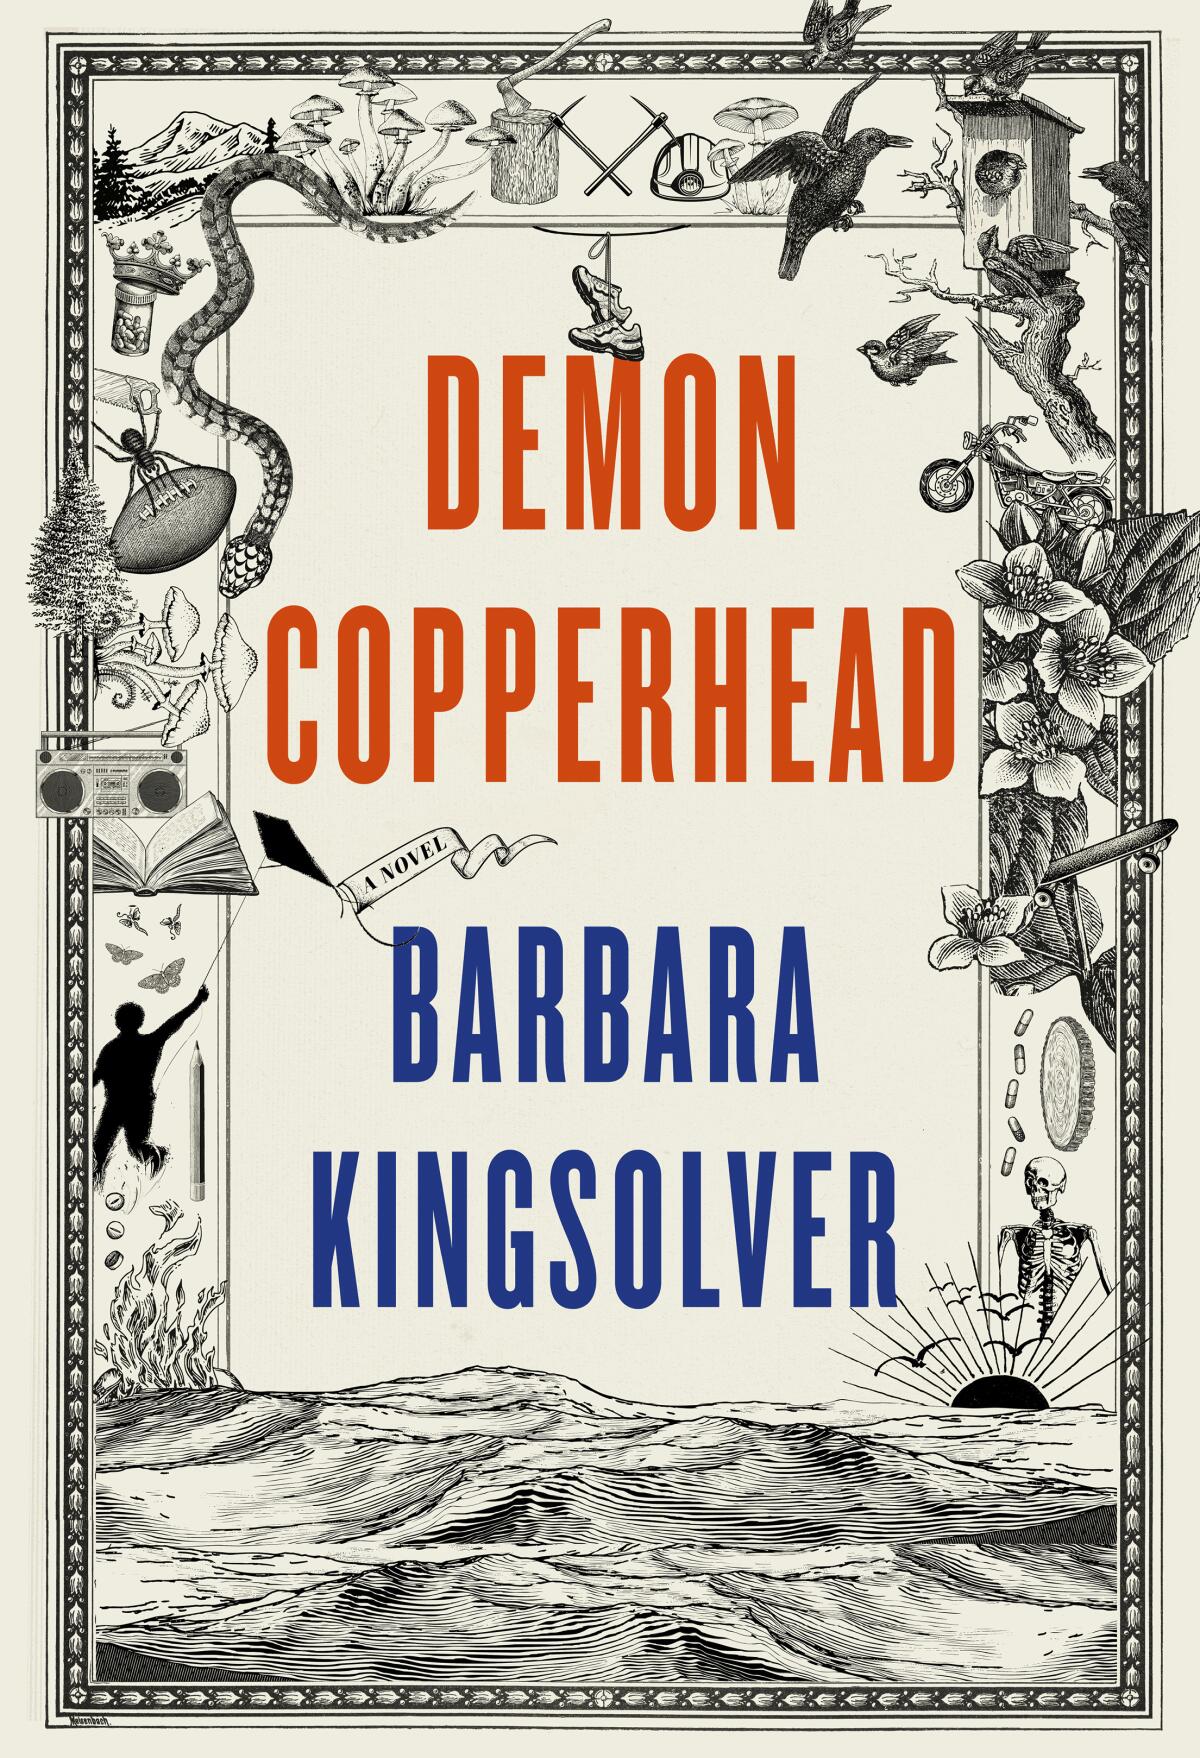 This cover image released by Harper shows "Demon Copperhead" by Barbara Kingsolver. (Harper via AP)